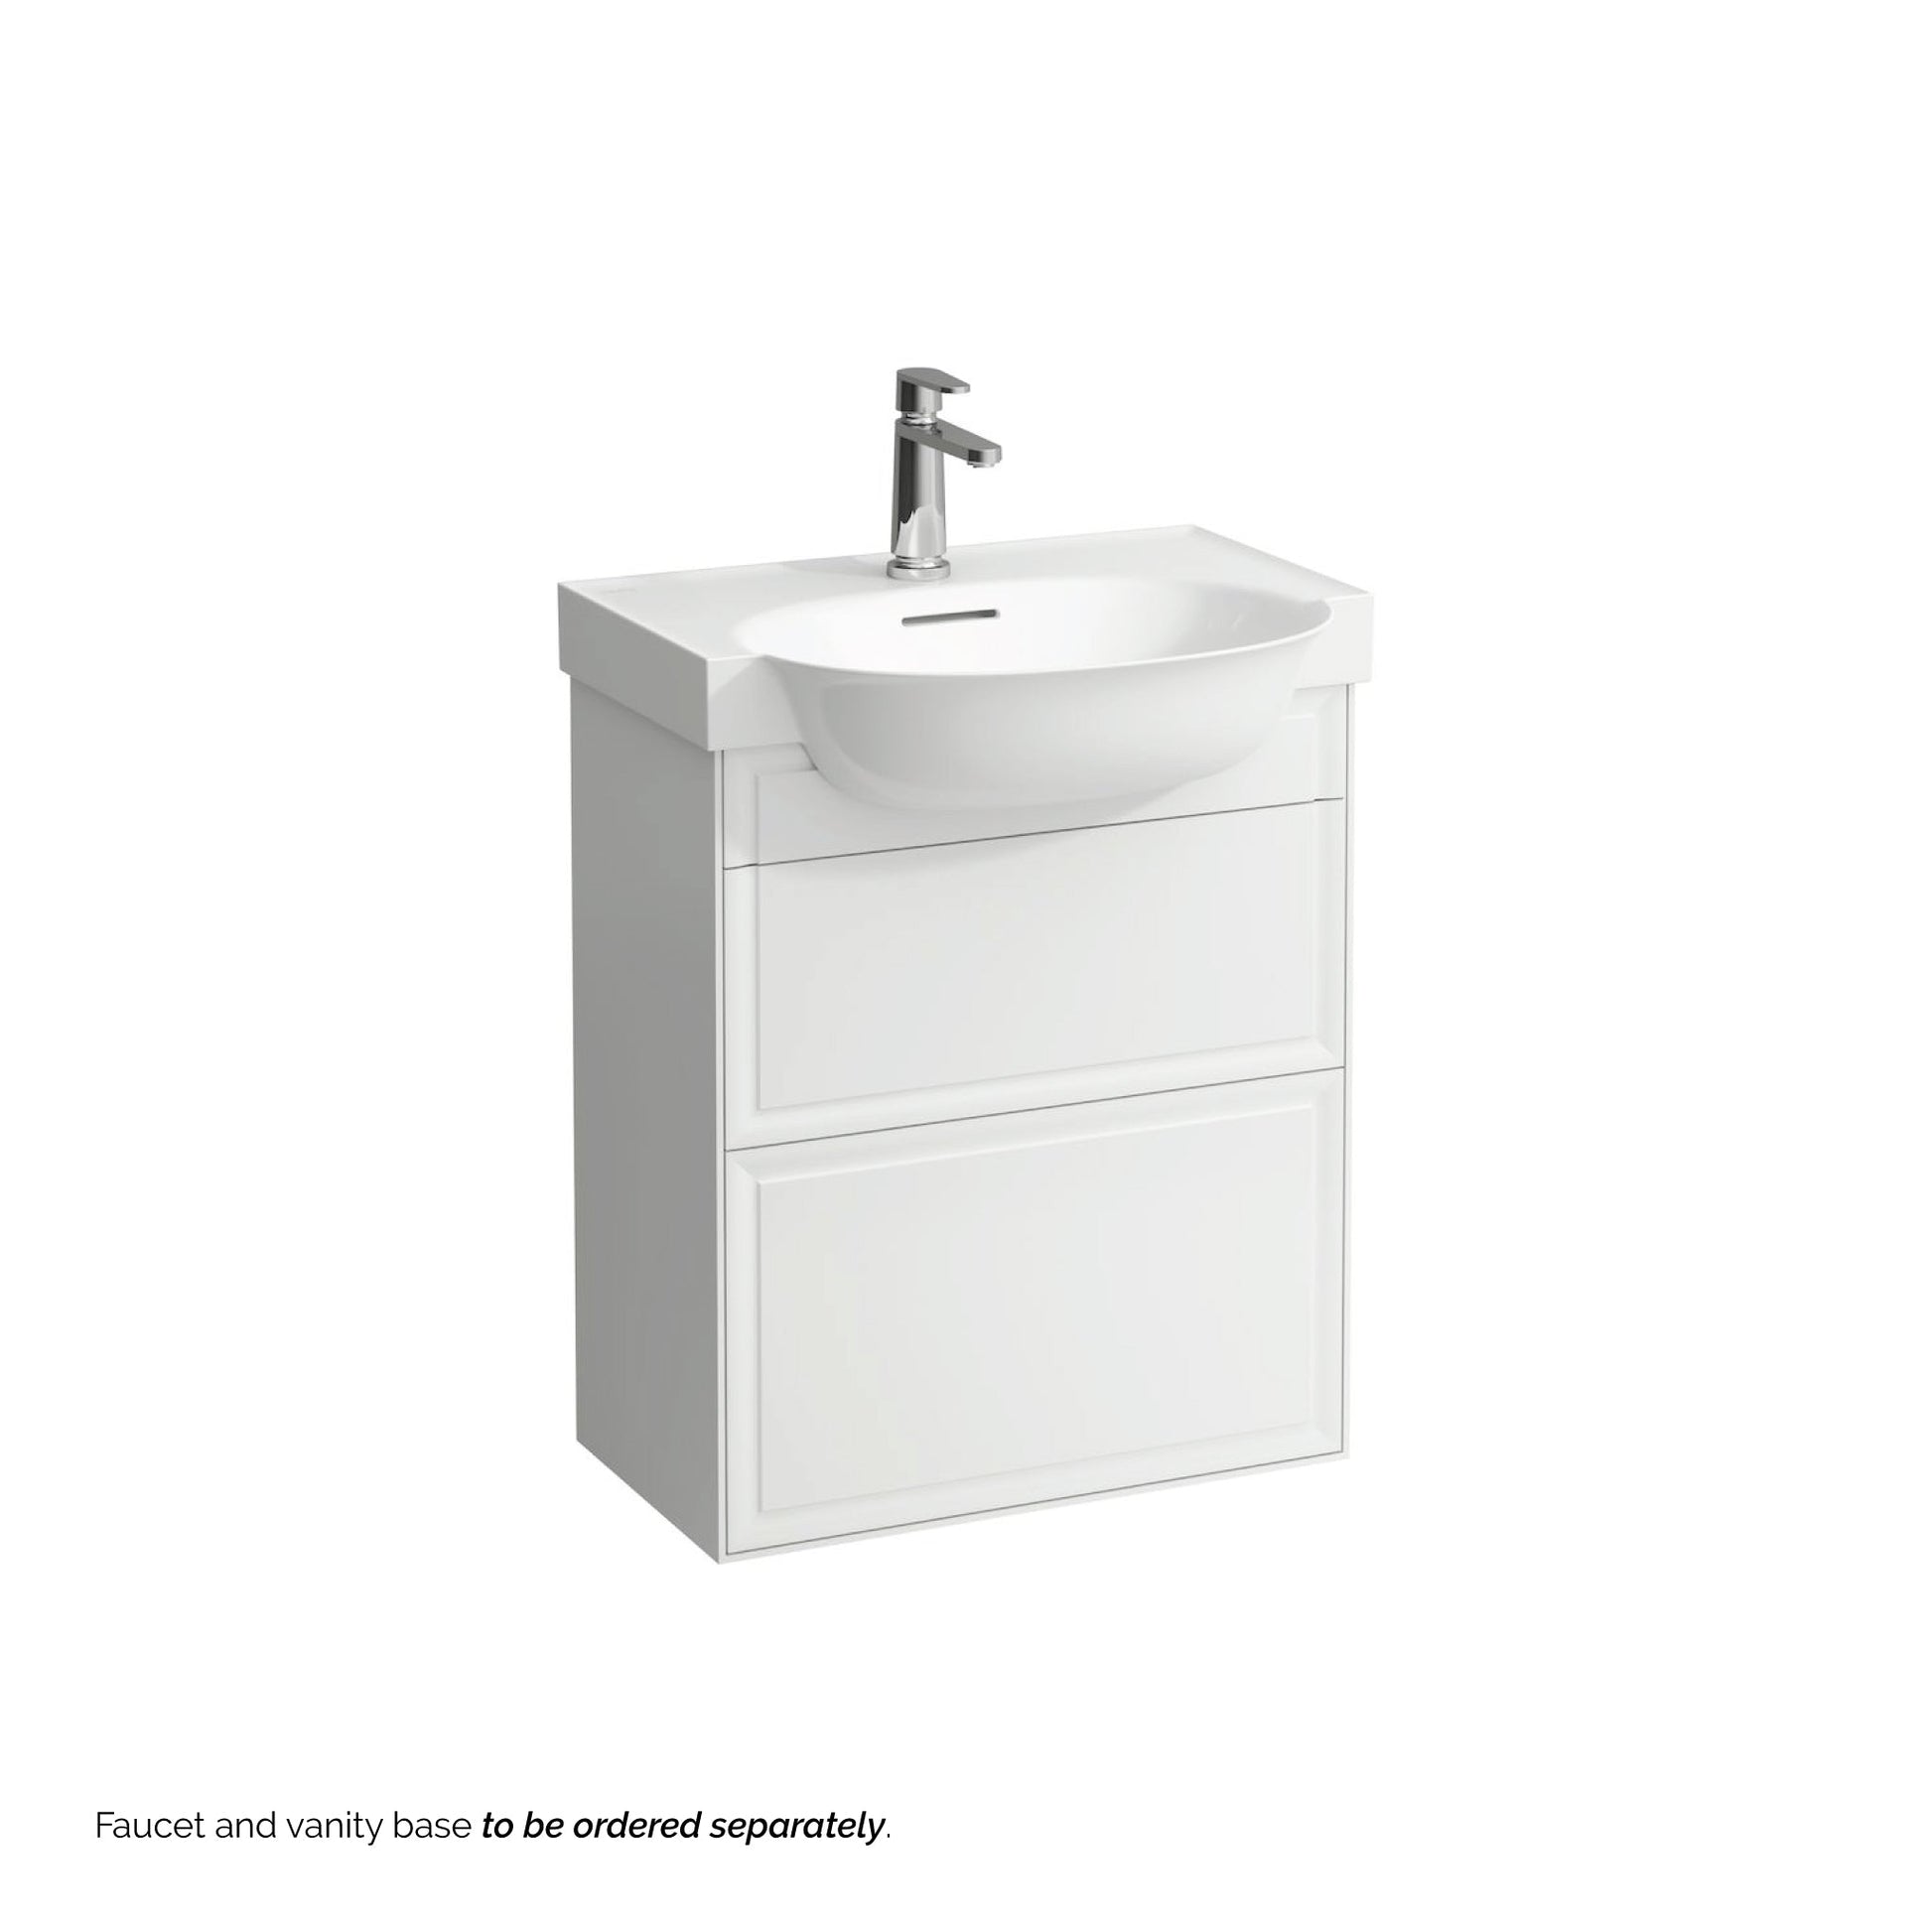 Laufen New Classic 24" x 19" Matte White Ceramic Wall-Mounted Bathroom Sink With Faucet Hole